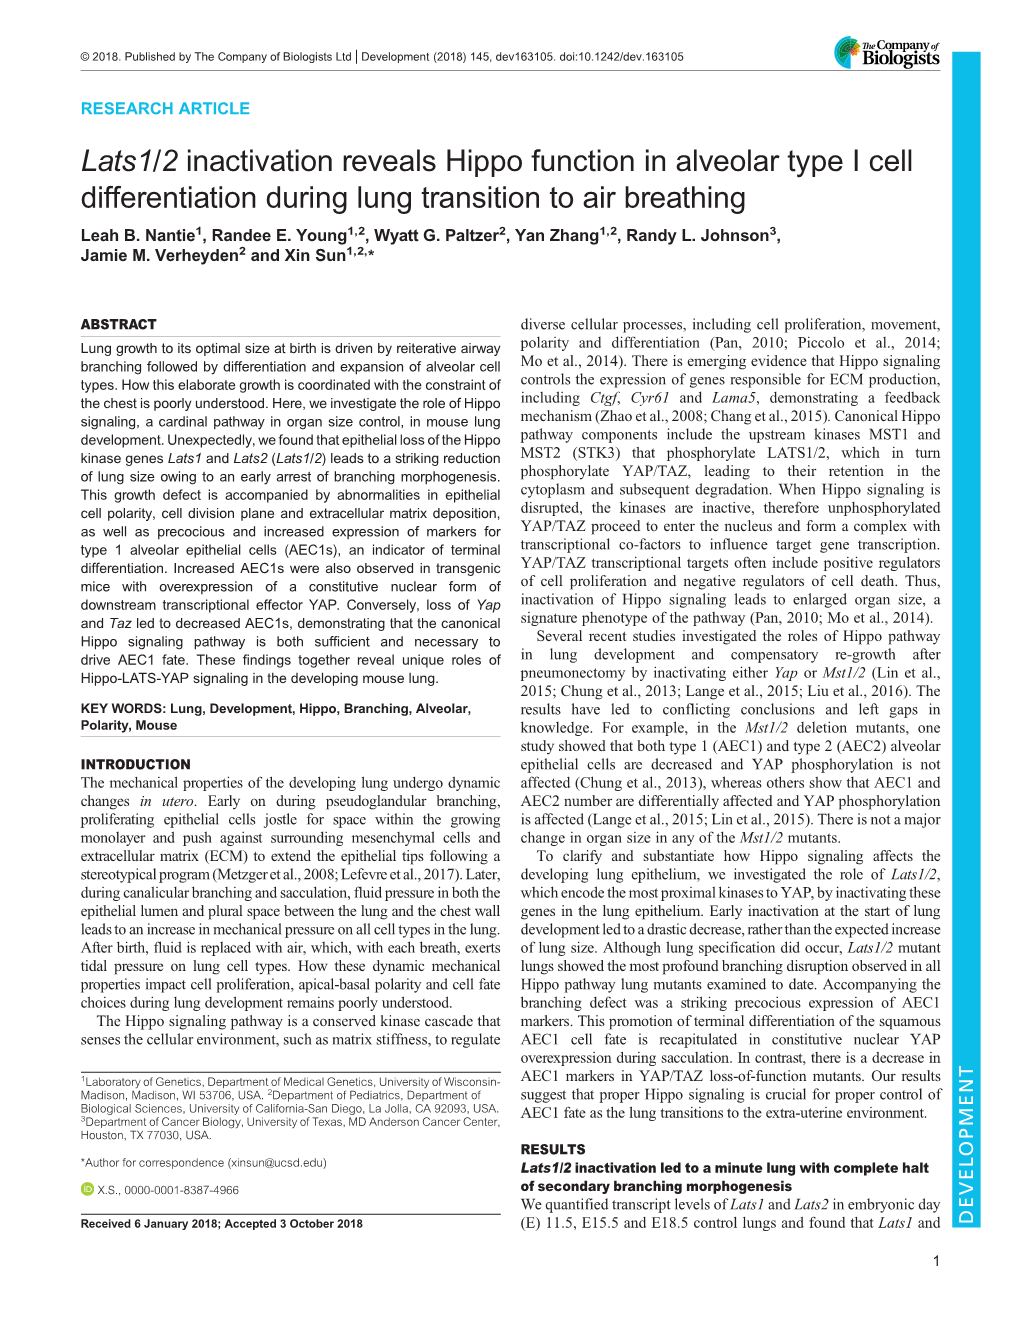 Lats1/2 Inactivation Reveals Hippo Function in Alveolar Type I Cell Differentiation During Lung Transition to Air Breathing Leah B